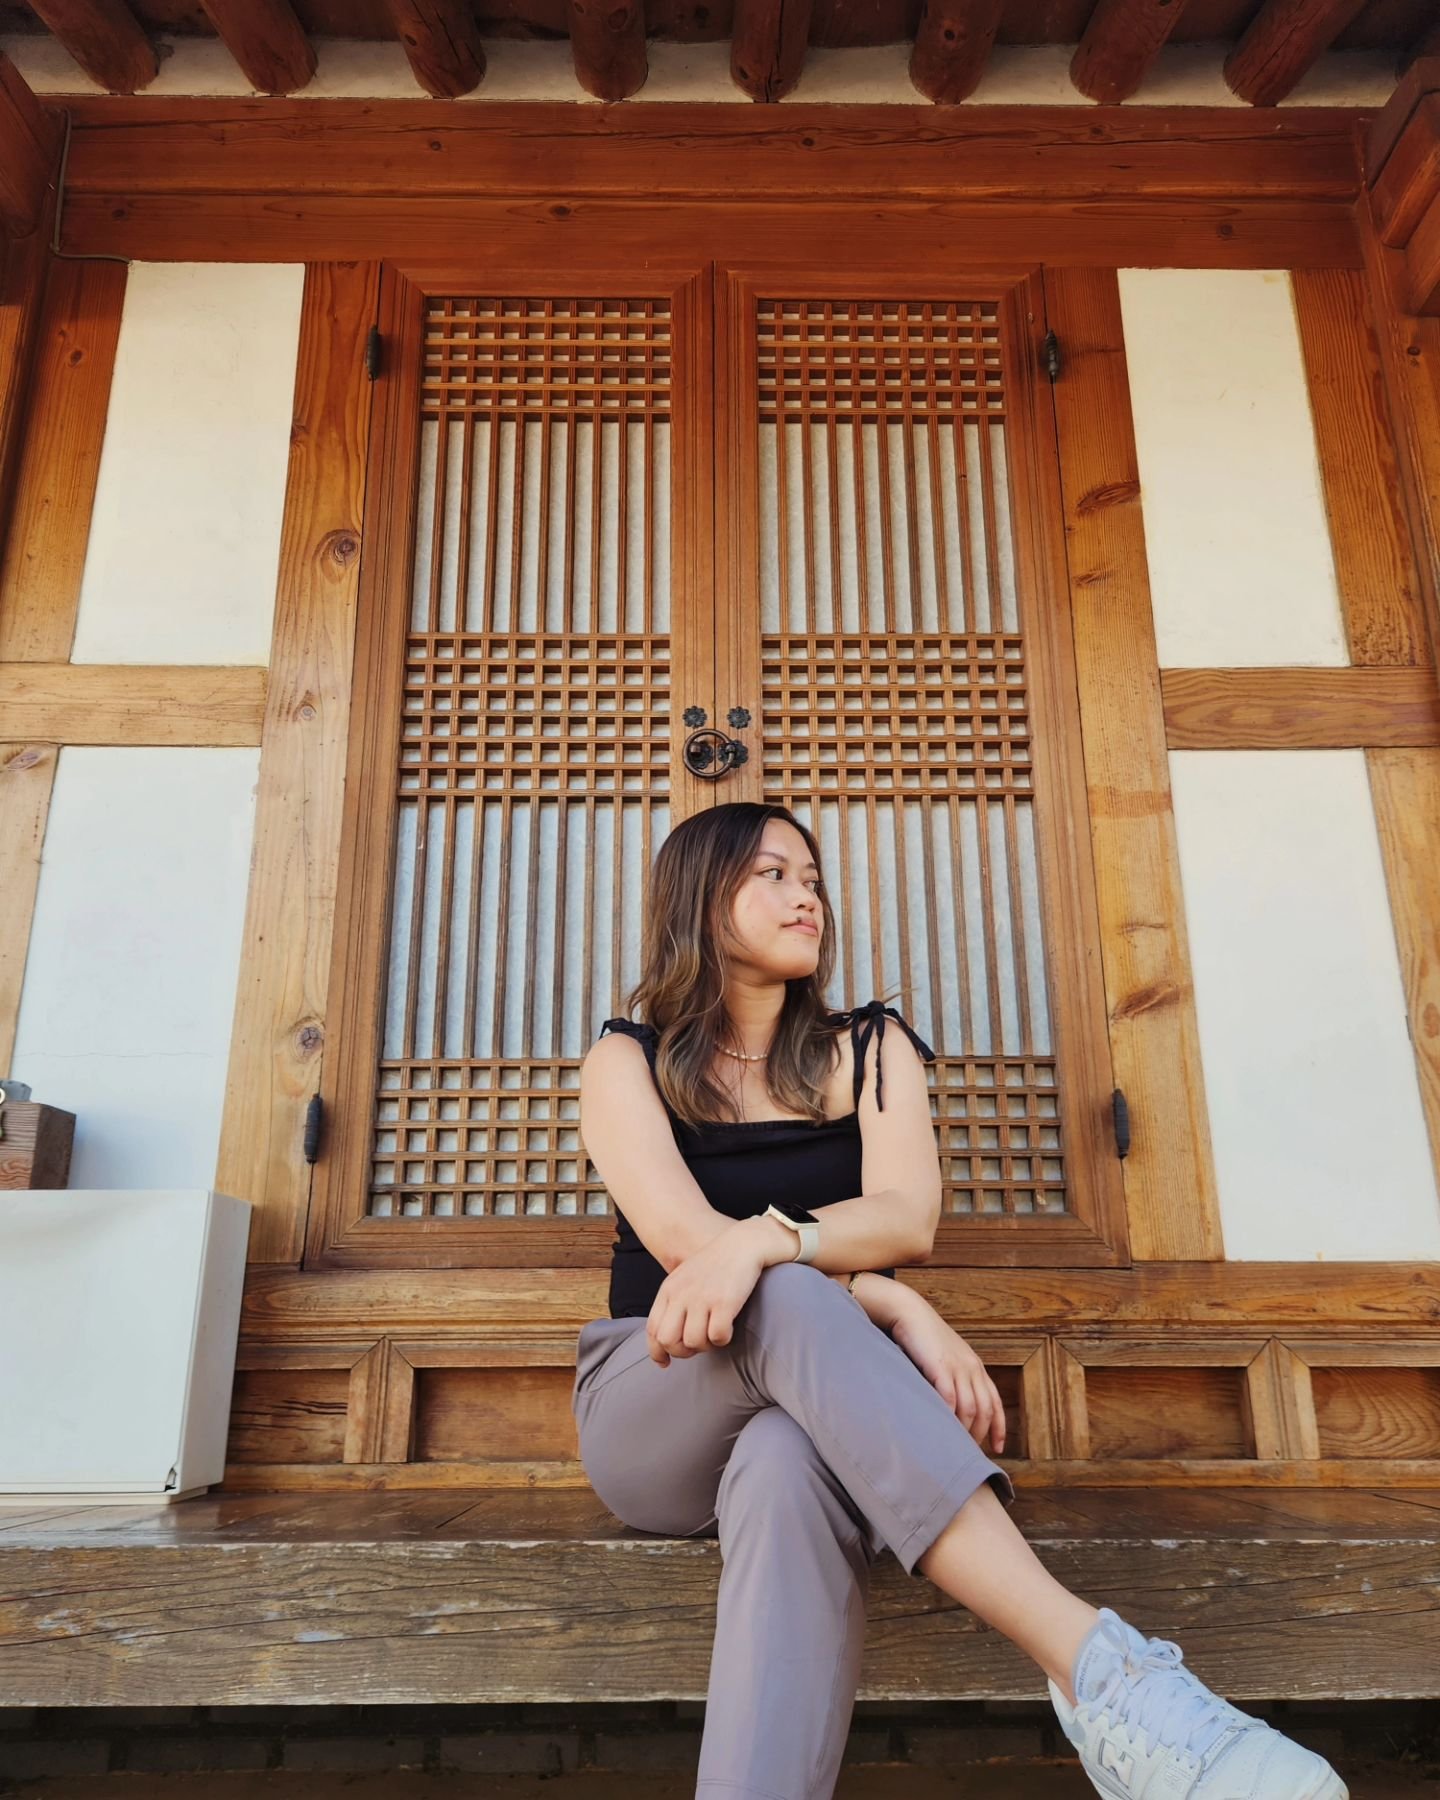 more of gyeongju 😍

continuing my #gisellewandersoff #fromthearchives with a double post for this beautiful historical city of gyeongju! called &quot;the museum without walls&quot;, you could spend days on end learning about all the cultural sites h